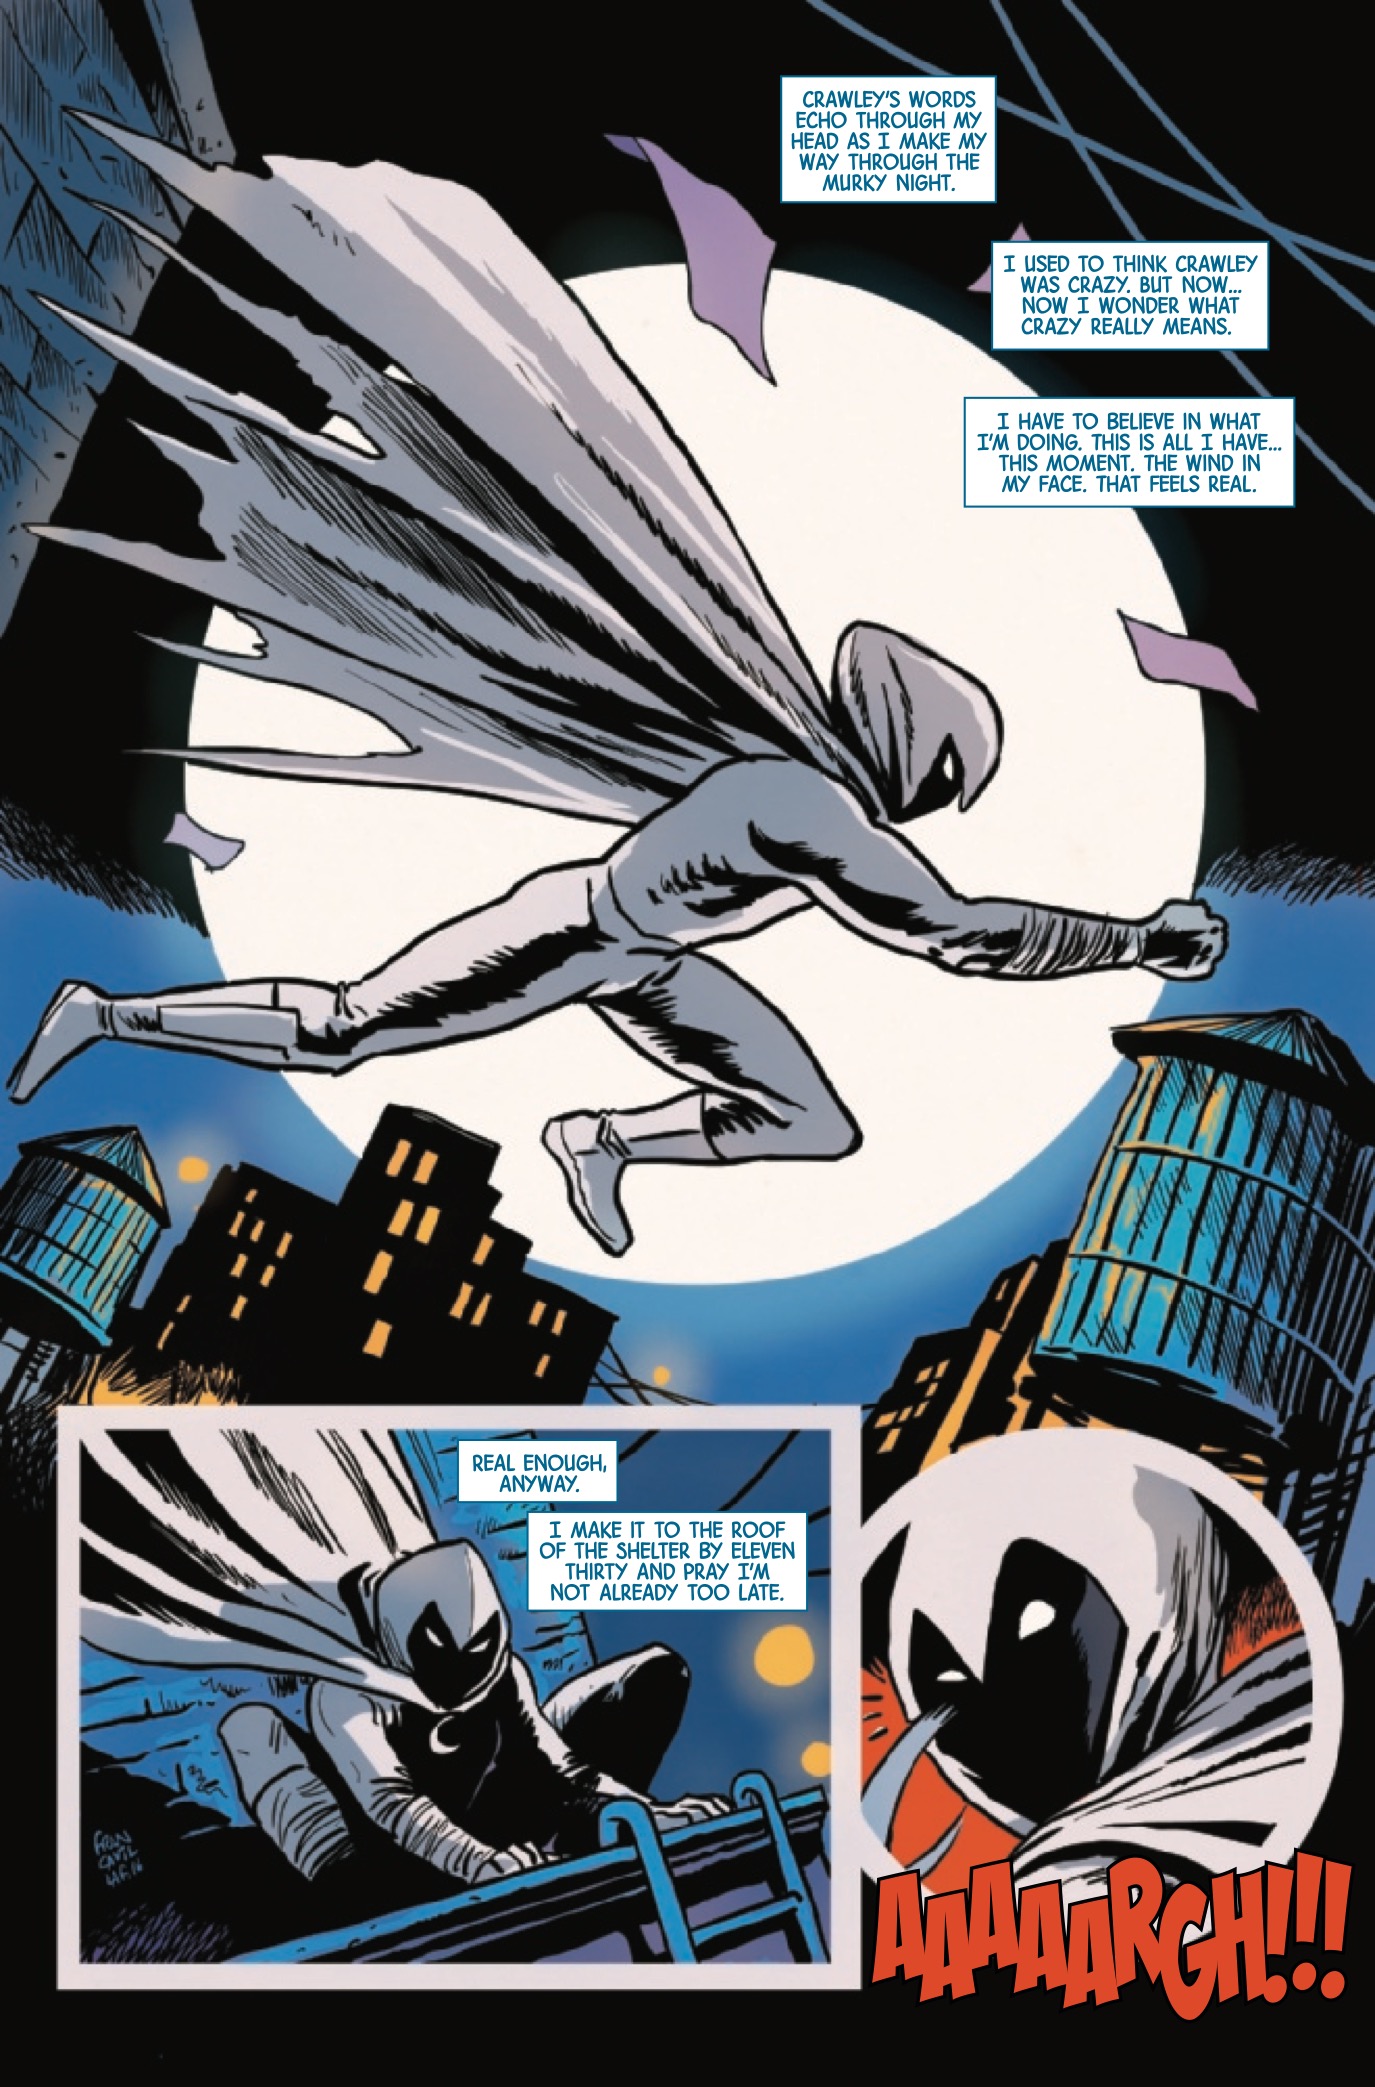 Moon Knight #8 Review